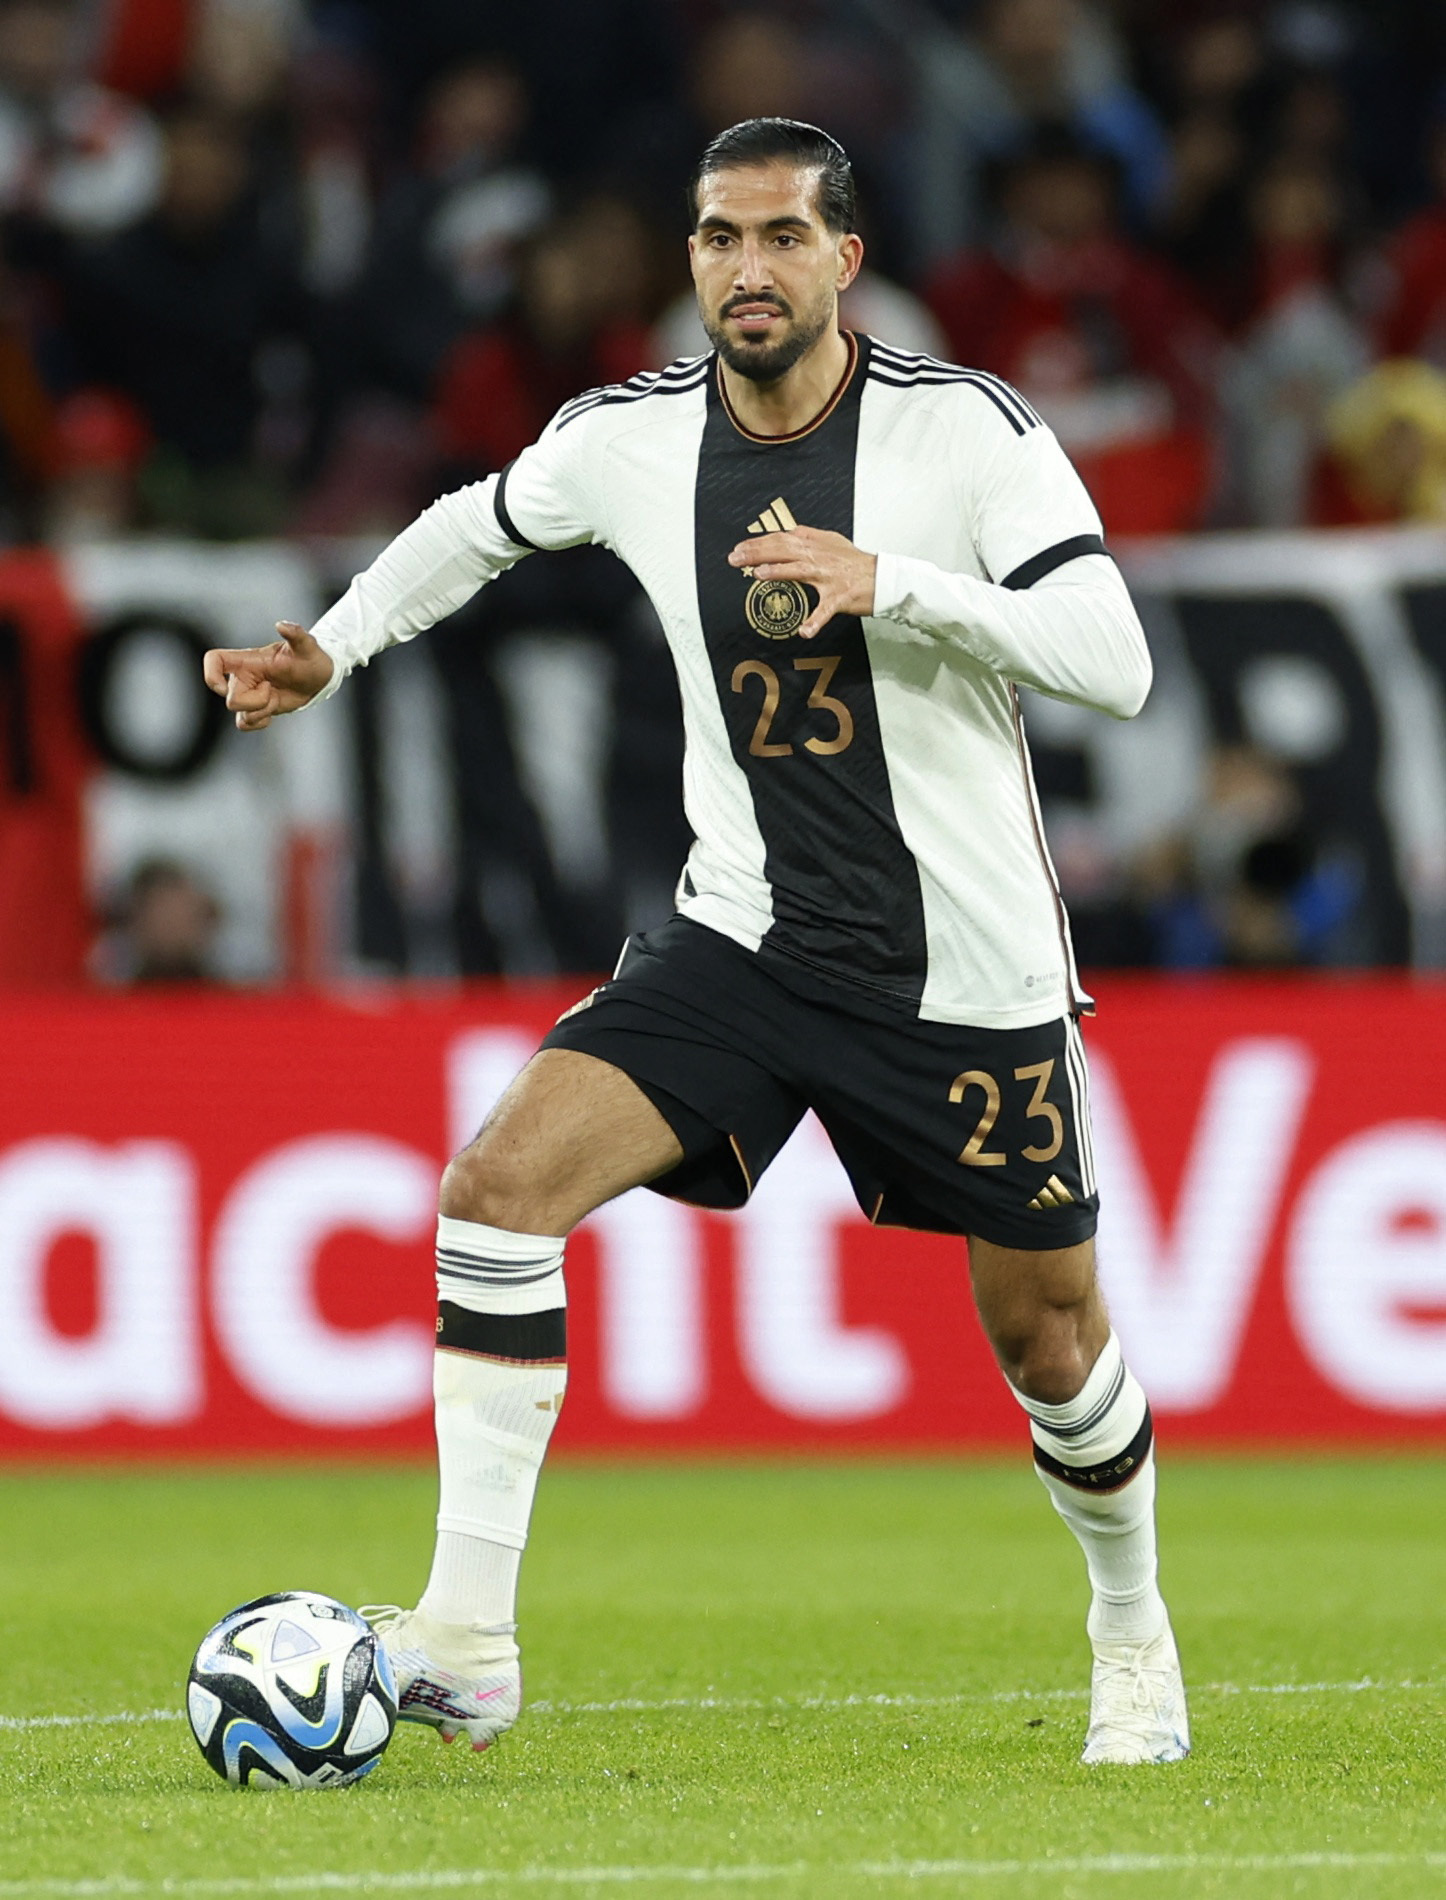 Soccer Football - International Friendly - Germany v Peru - MEWA Arena, Mainz, Germany - March 25, 2023 Germany's Emre Can in action REUTERS/Heiko Becker